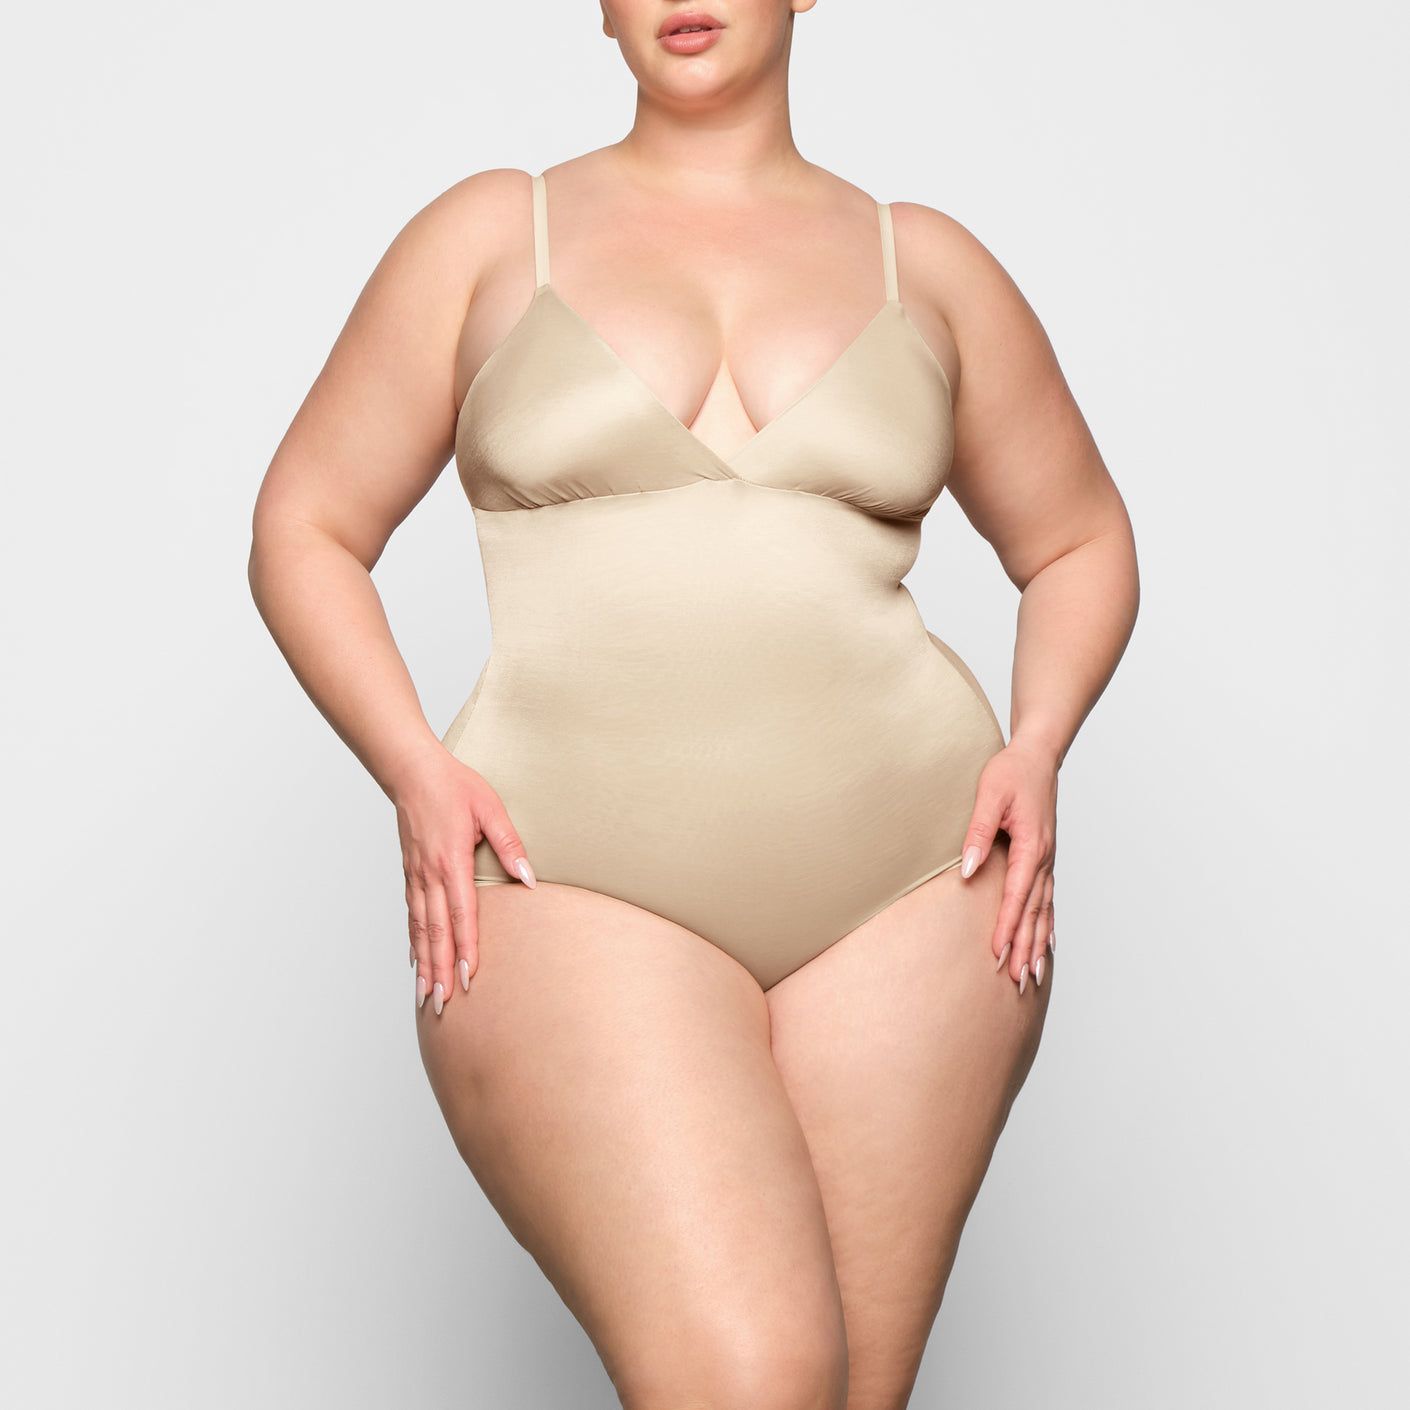 BARELY THERE BODYSUIT BRIEF